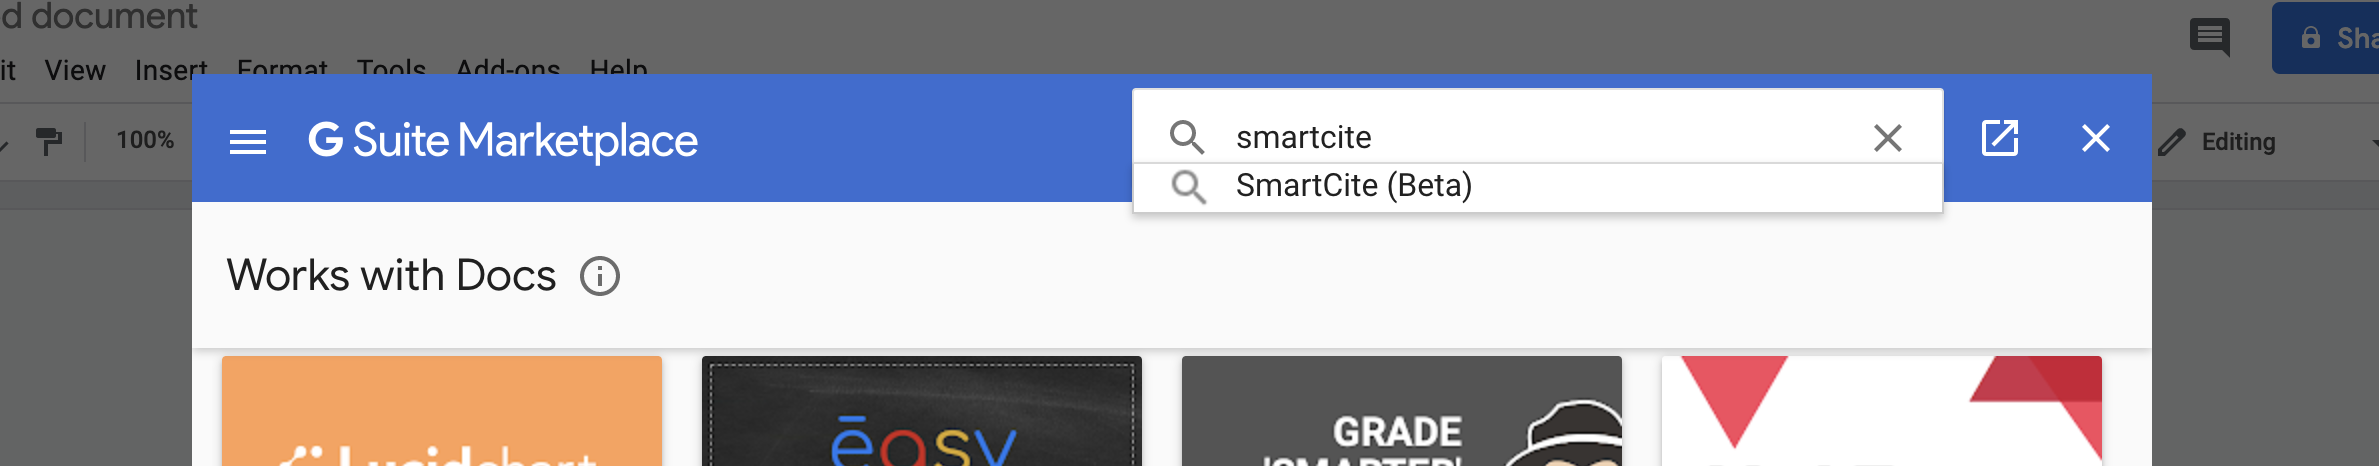 SmartCite in G Suite Marketplace